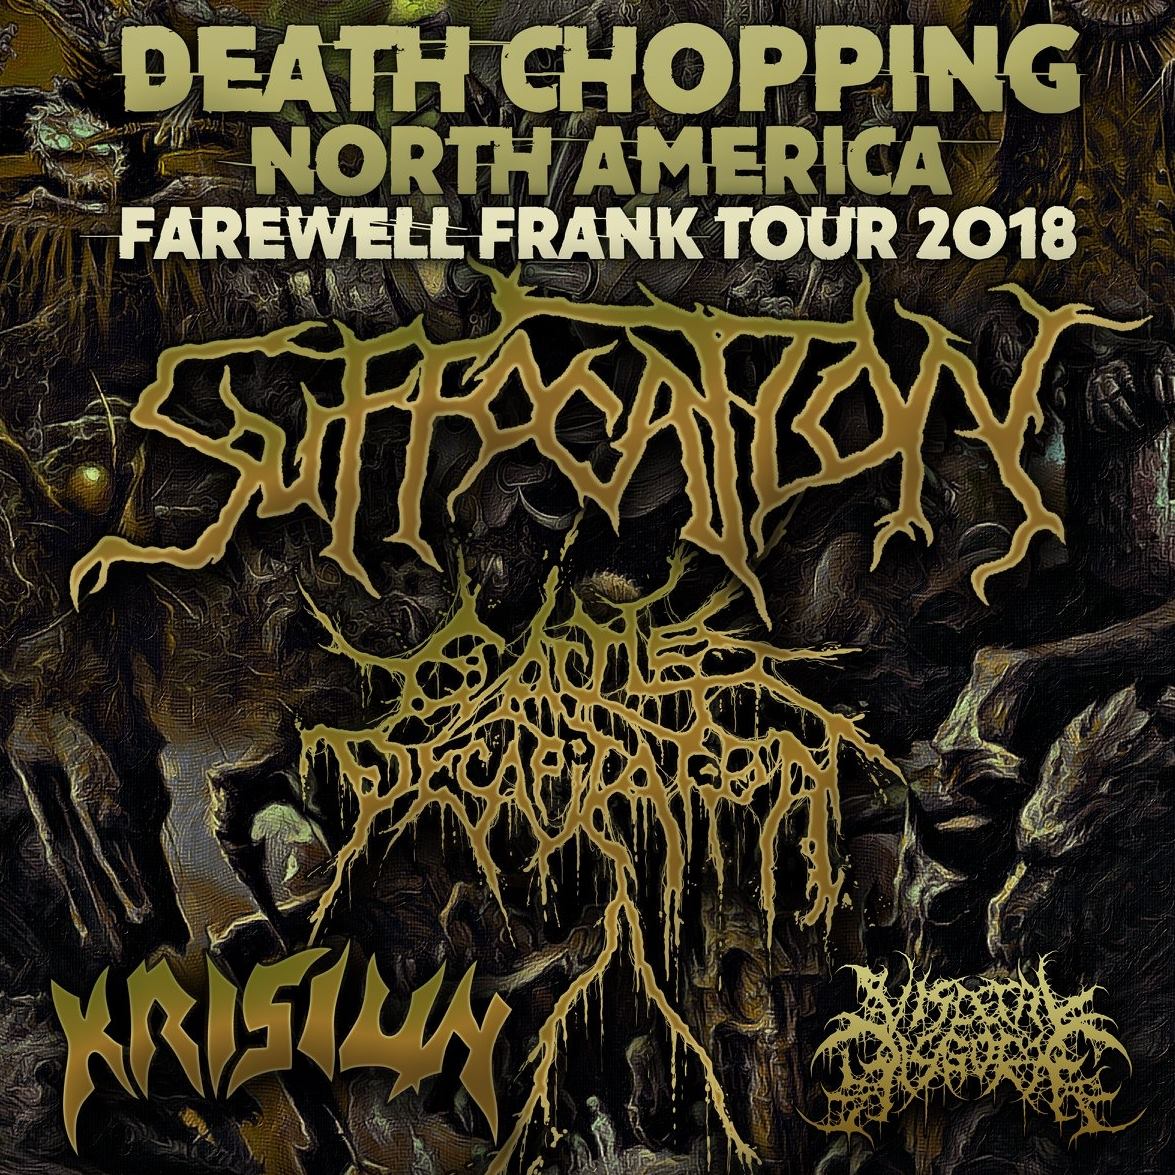 Win a pair of tickets to see Suffocation in NYC on Nov 16th